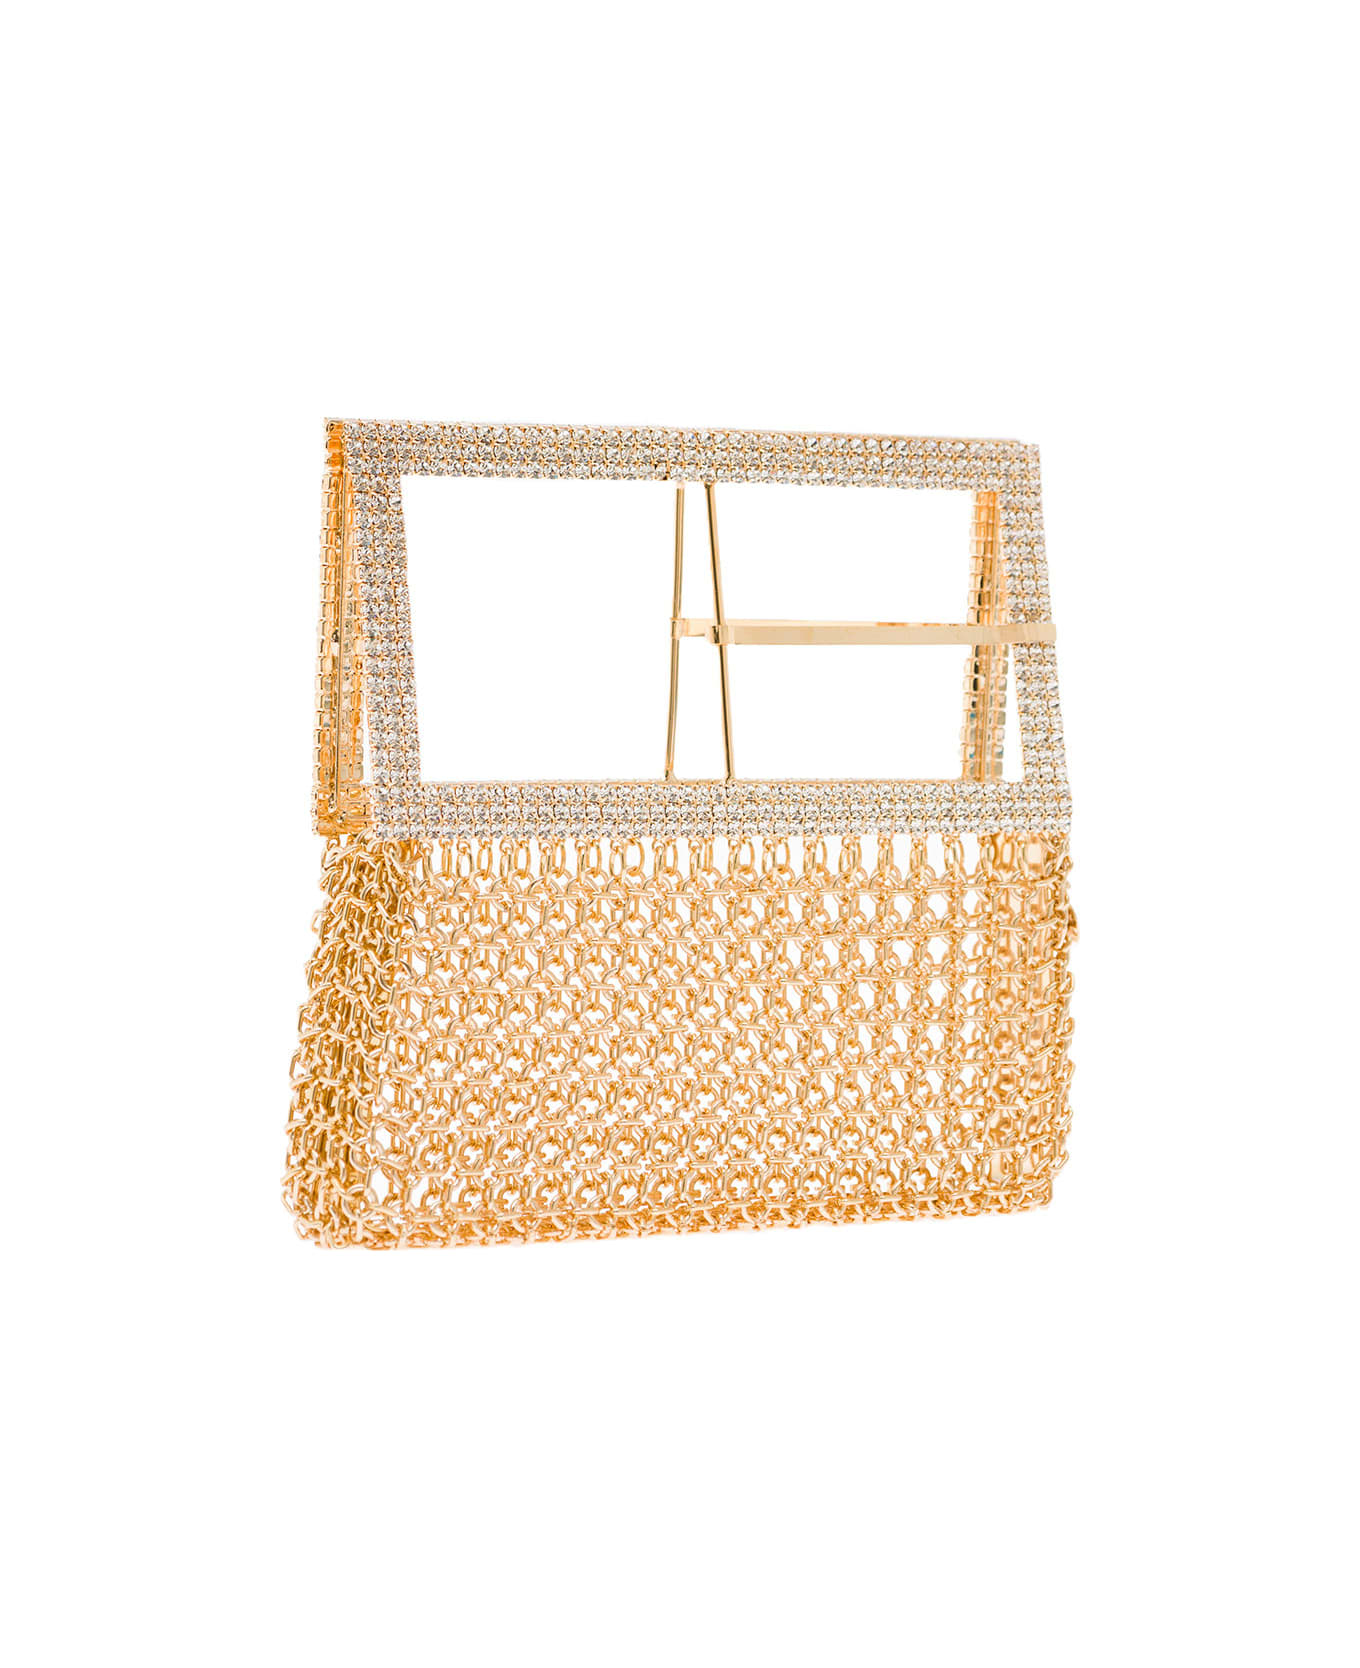 Silvia Gnecchi 'downtown Bag' Gold-colored Shoulder Bag With Maxi Buckle In Metal Mesh Woman - Metallic ショルダーバッグ